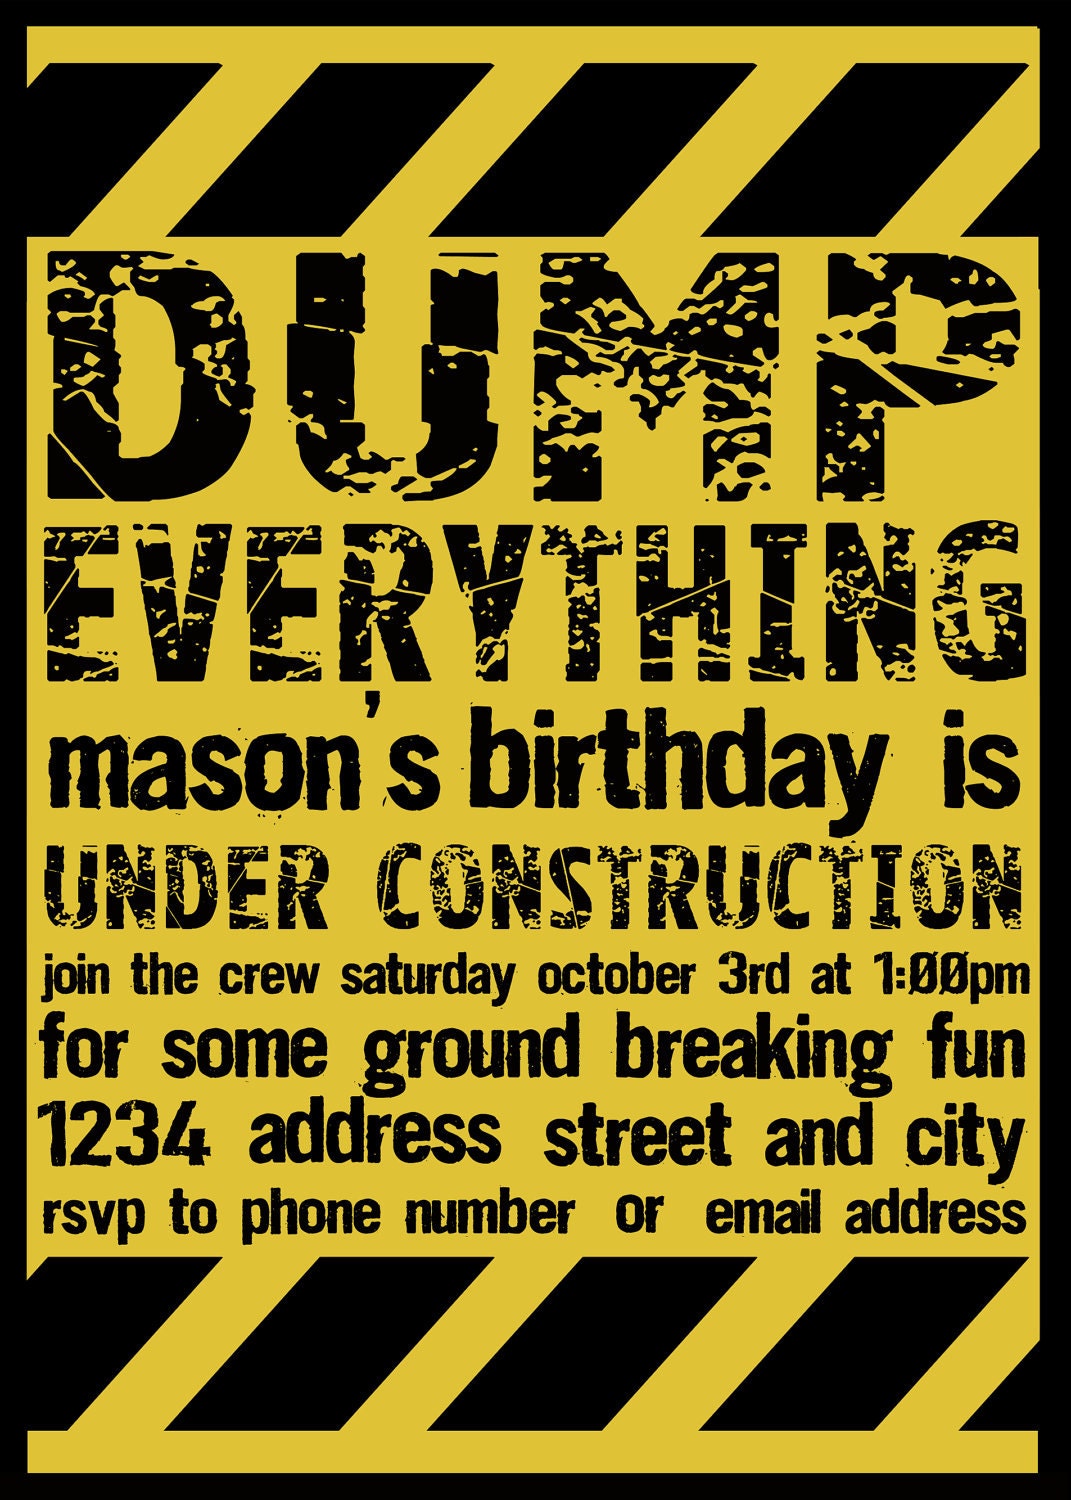 printable-construction-invitation-by-belvajune-on-etsy